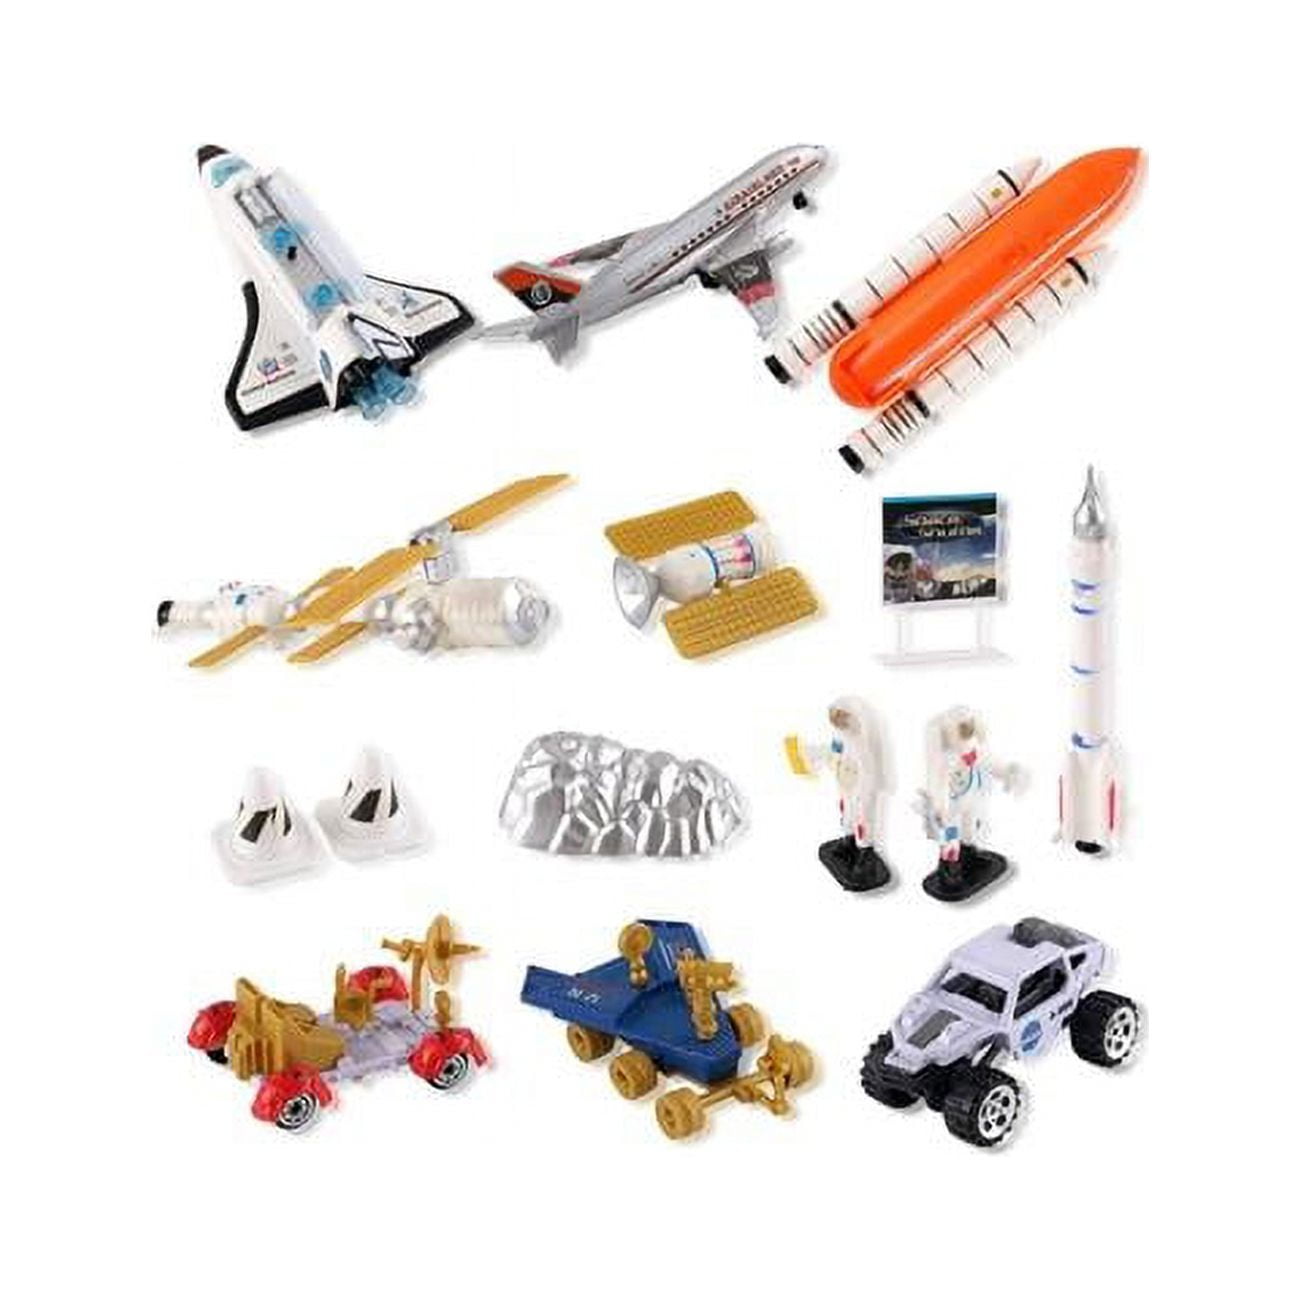 Ps537 Mars Space Shuttle Playset For Kids With Rockets Satellites Rovers & Vehicles - 15 Piece